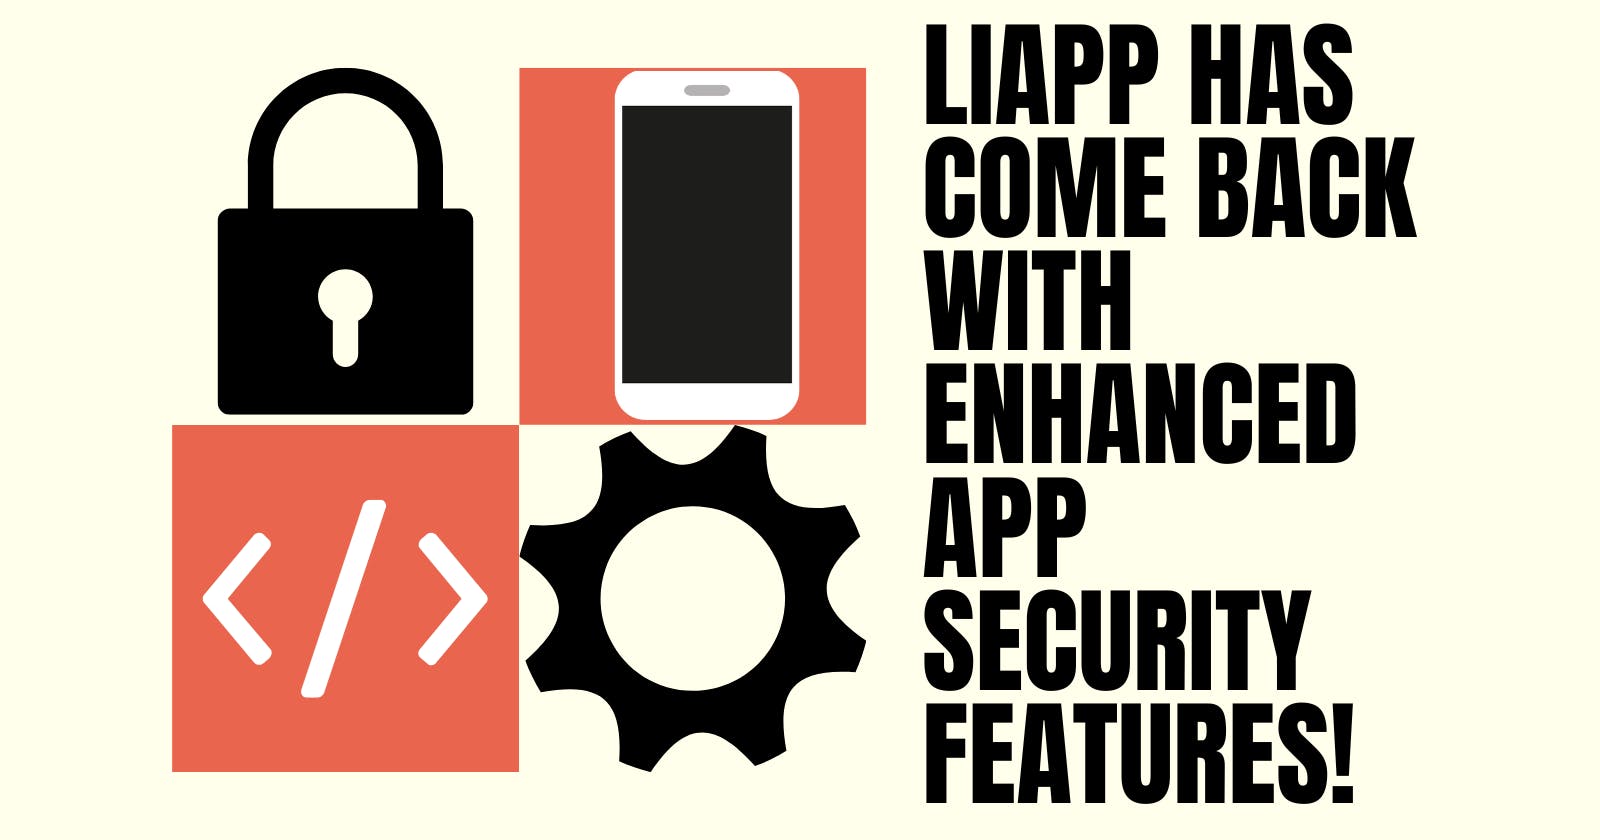 LIAPP's enhanced security features for the app!